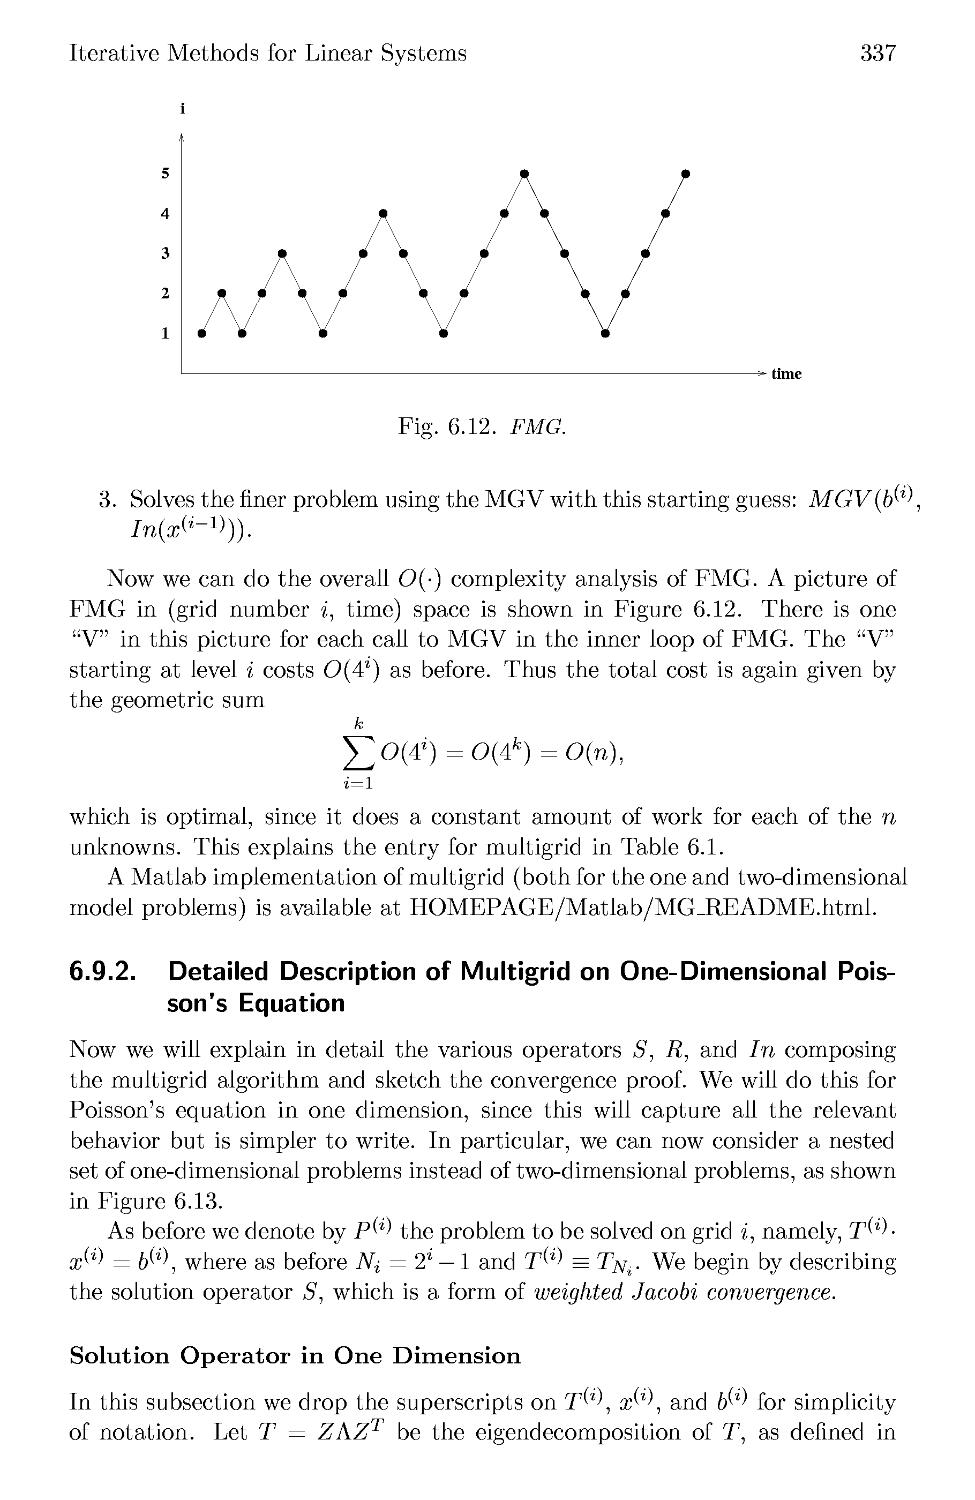 6.9.2 Detailed Description of Multigrid on One-Dimensional Poisson's Equation